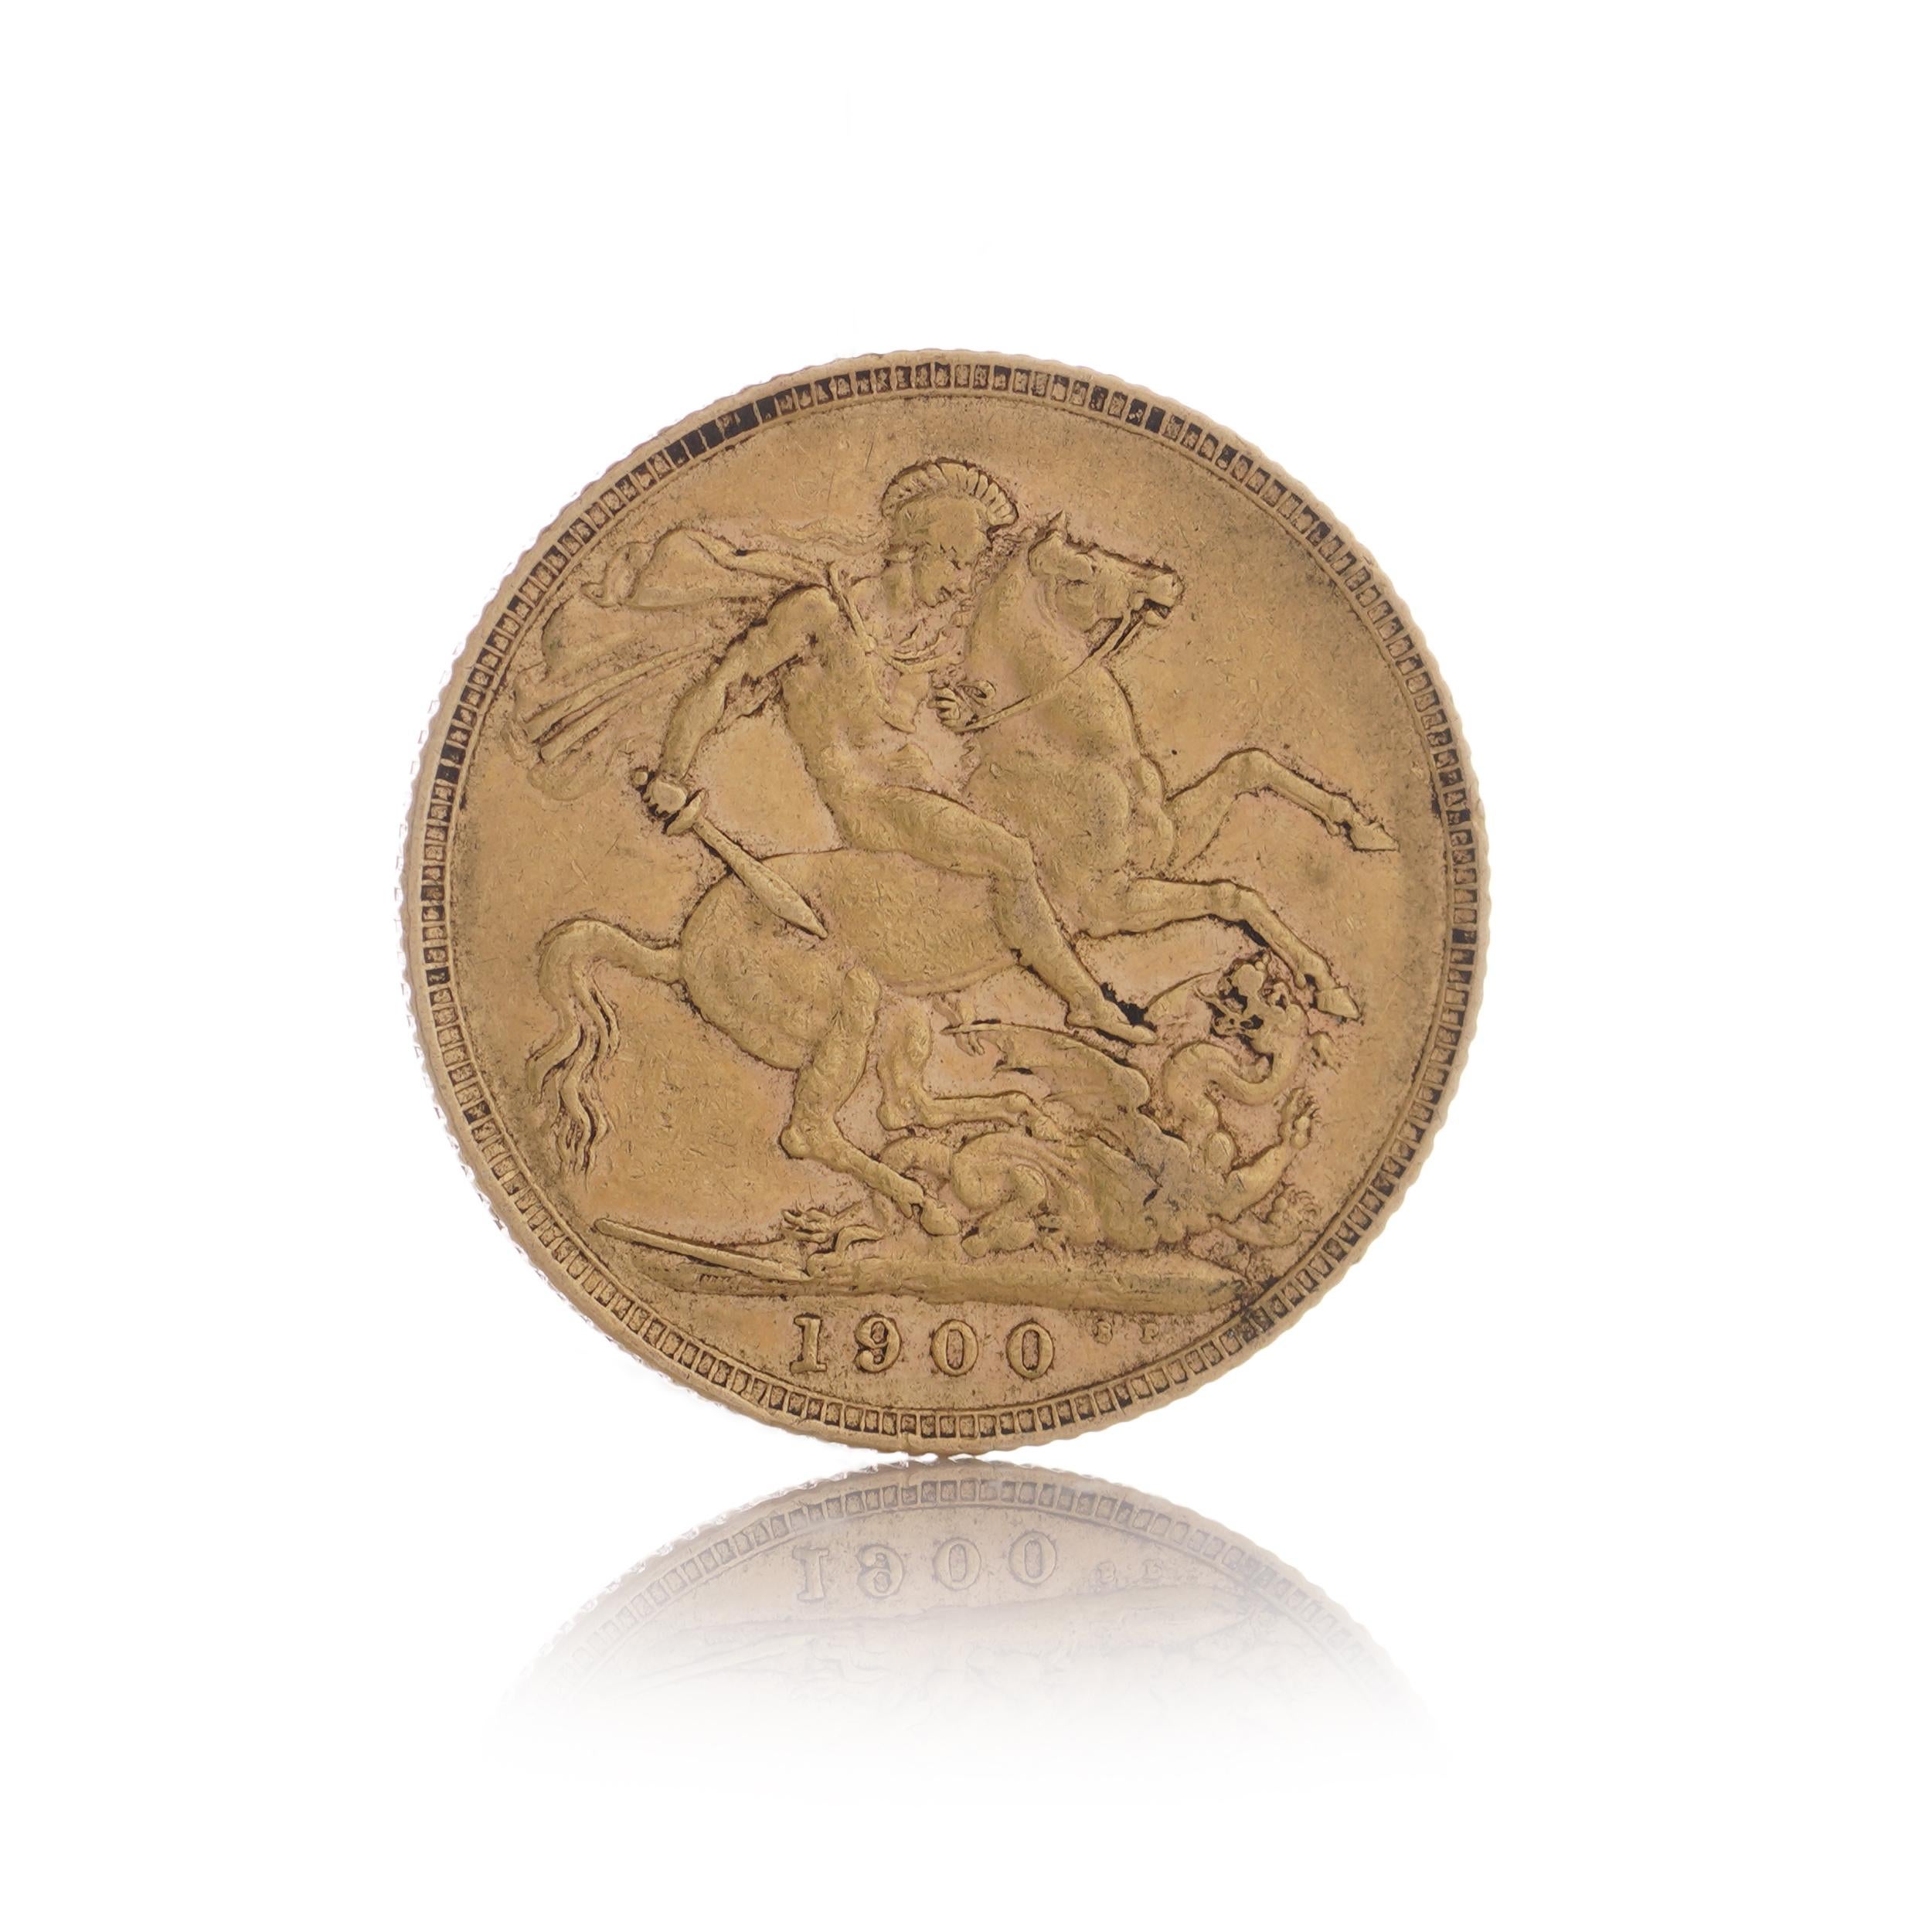 A 1900 gold Sovereign - with the Queen Victoria old (Veiled) head design. The lack of mintmark denotes the London Mint. Provided in a plastic capsule.

Manufacturer: Royal Mint
Weight (grams): 7.98
Pure gold content (grams): 7.3224
Fineness: